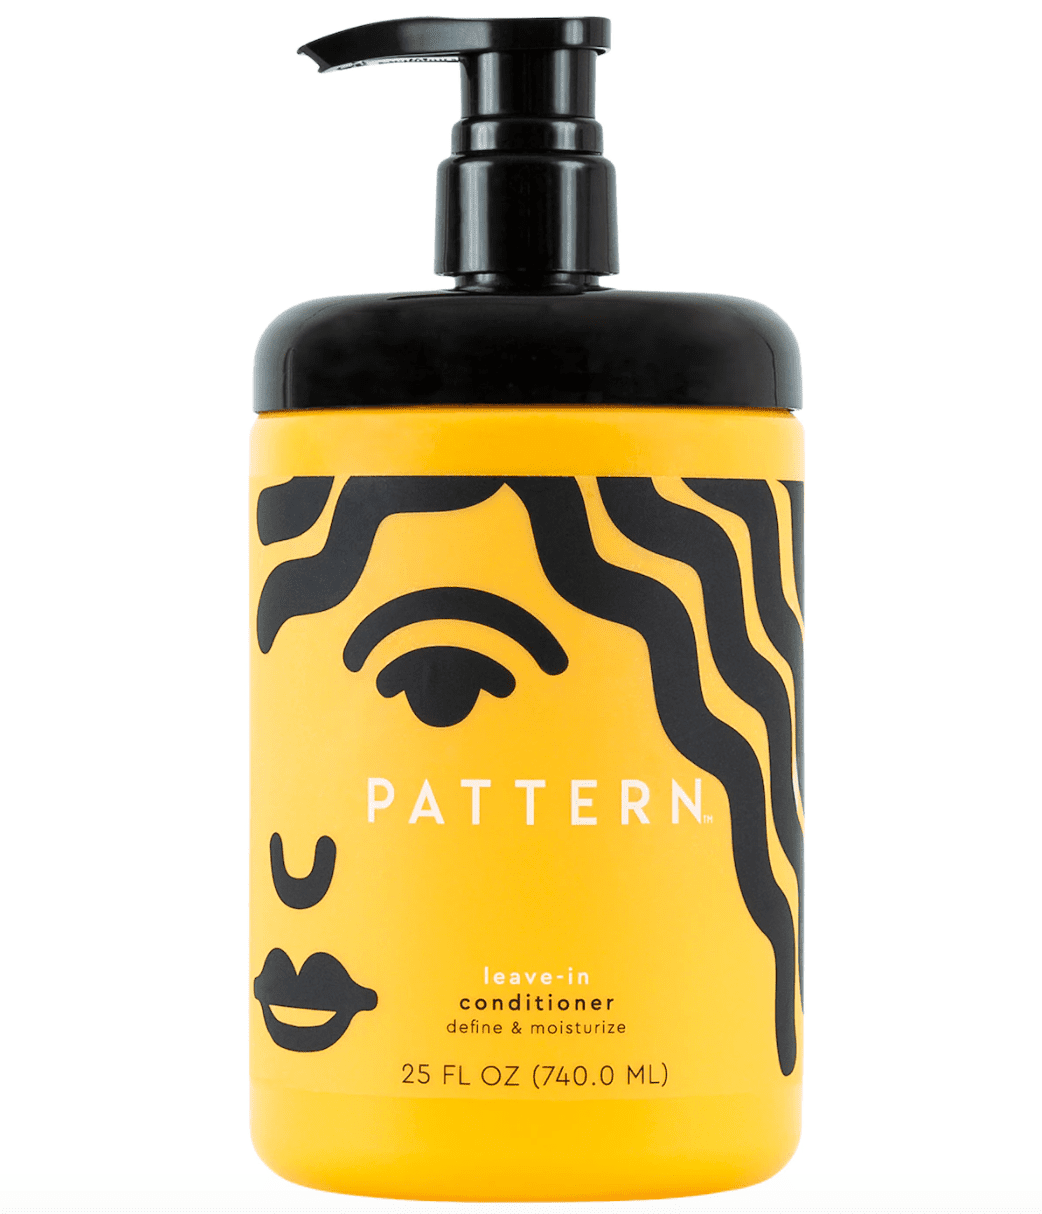 leave-in conditioner